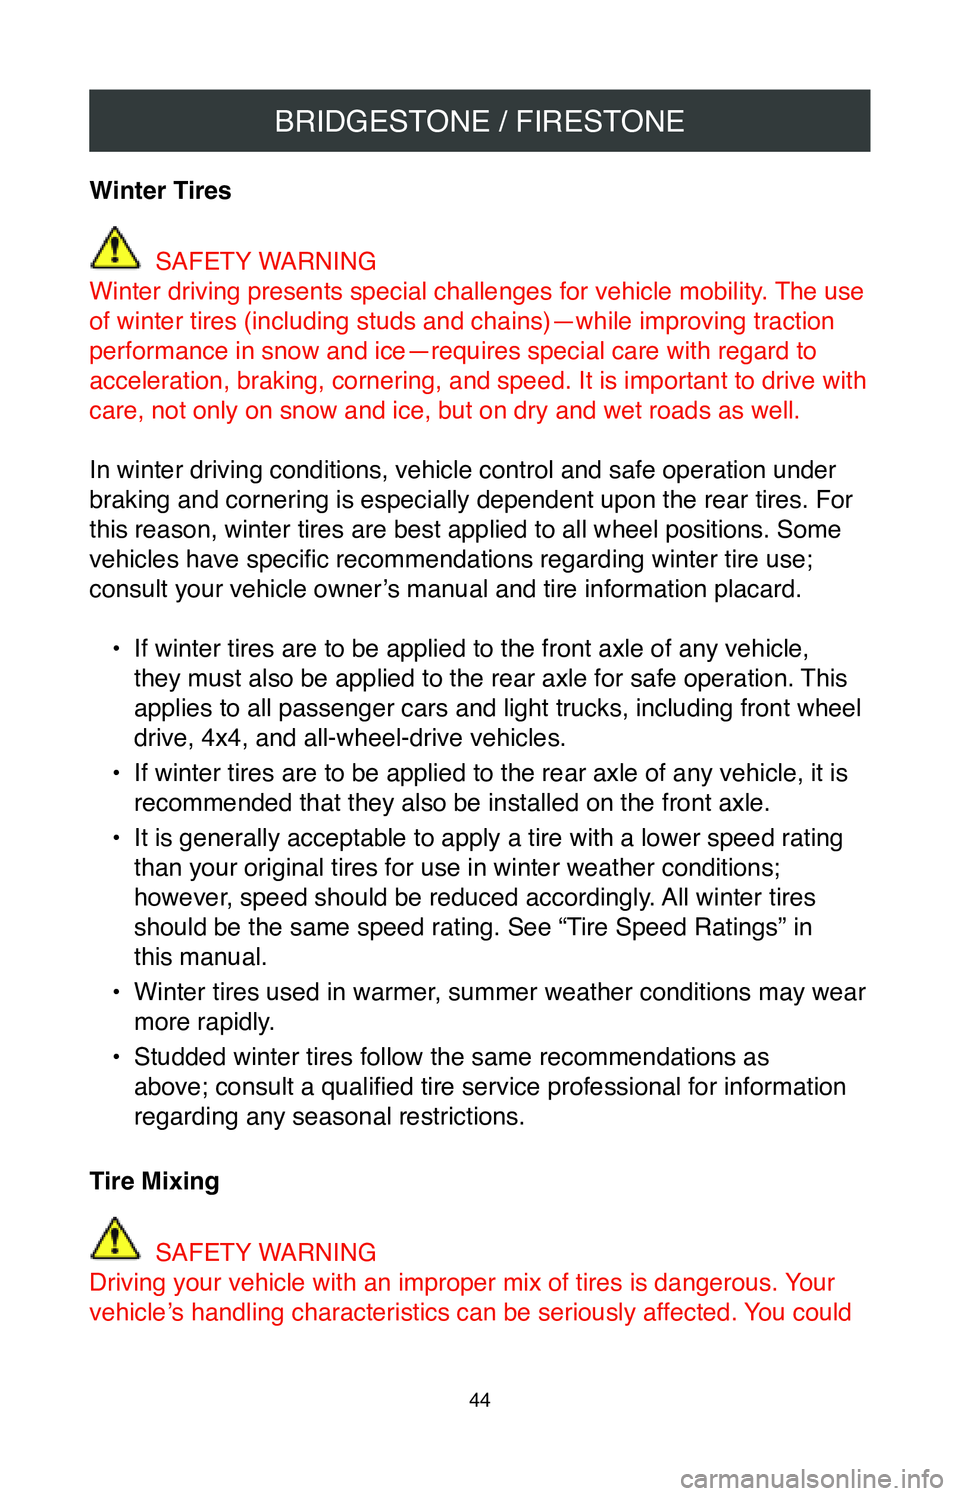 TOYOTA COROLLA HYBRID 2020  Warranties & Maintenance Guides (in English) BRIDGESTONE / FIRESTONE
44
Winter Tires 
 SAFETY WARNING
Winter driving presents special challenges for vehicle mobility. The use 
of winter tires (including studs and chains)—while improving tracti